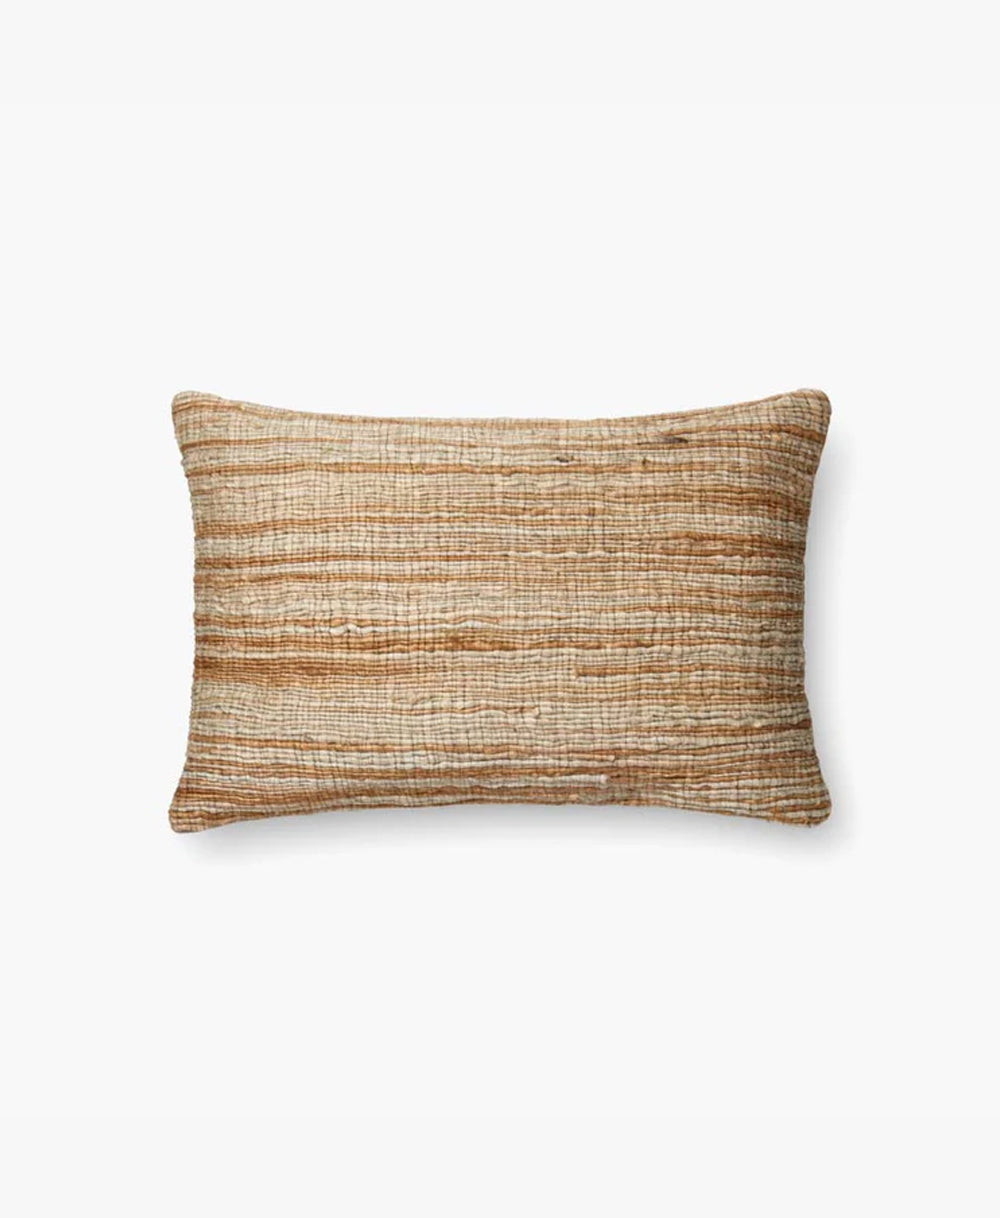 P4014 Space Dyed Jute Pillow - Camel/Beige